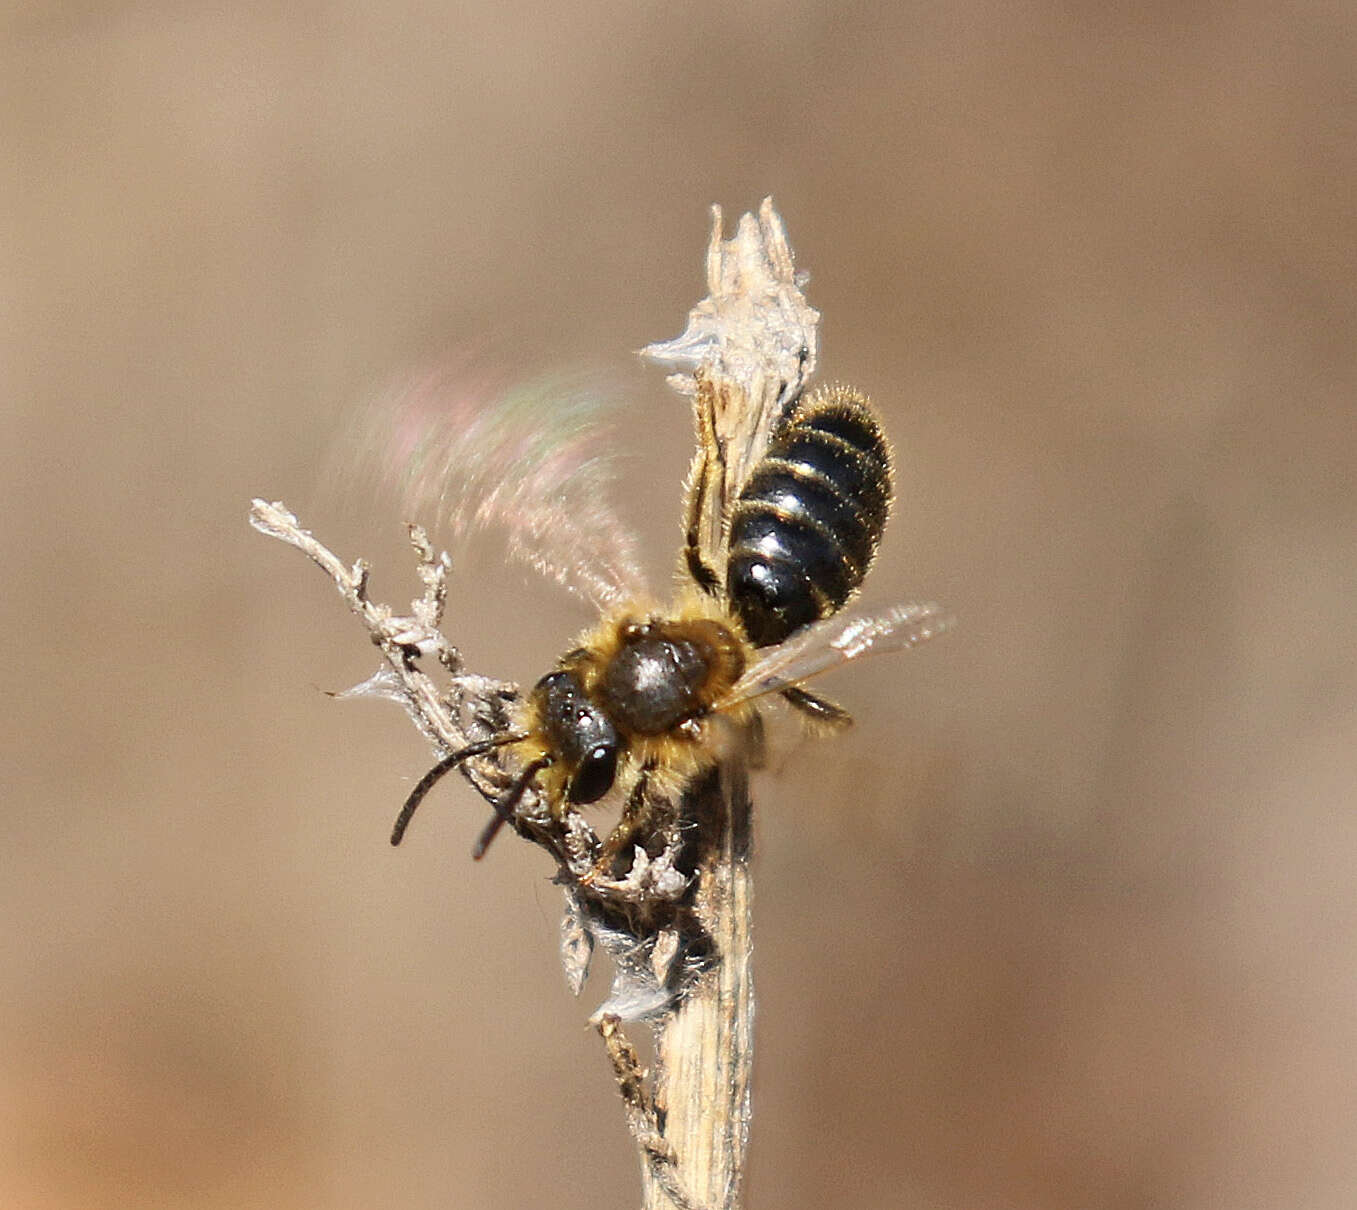 Image of Miserable Andrena